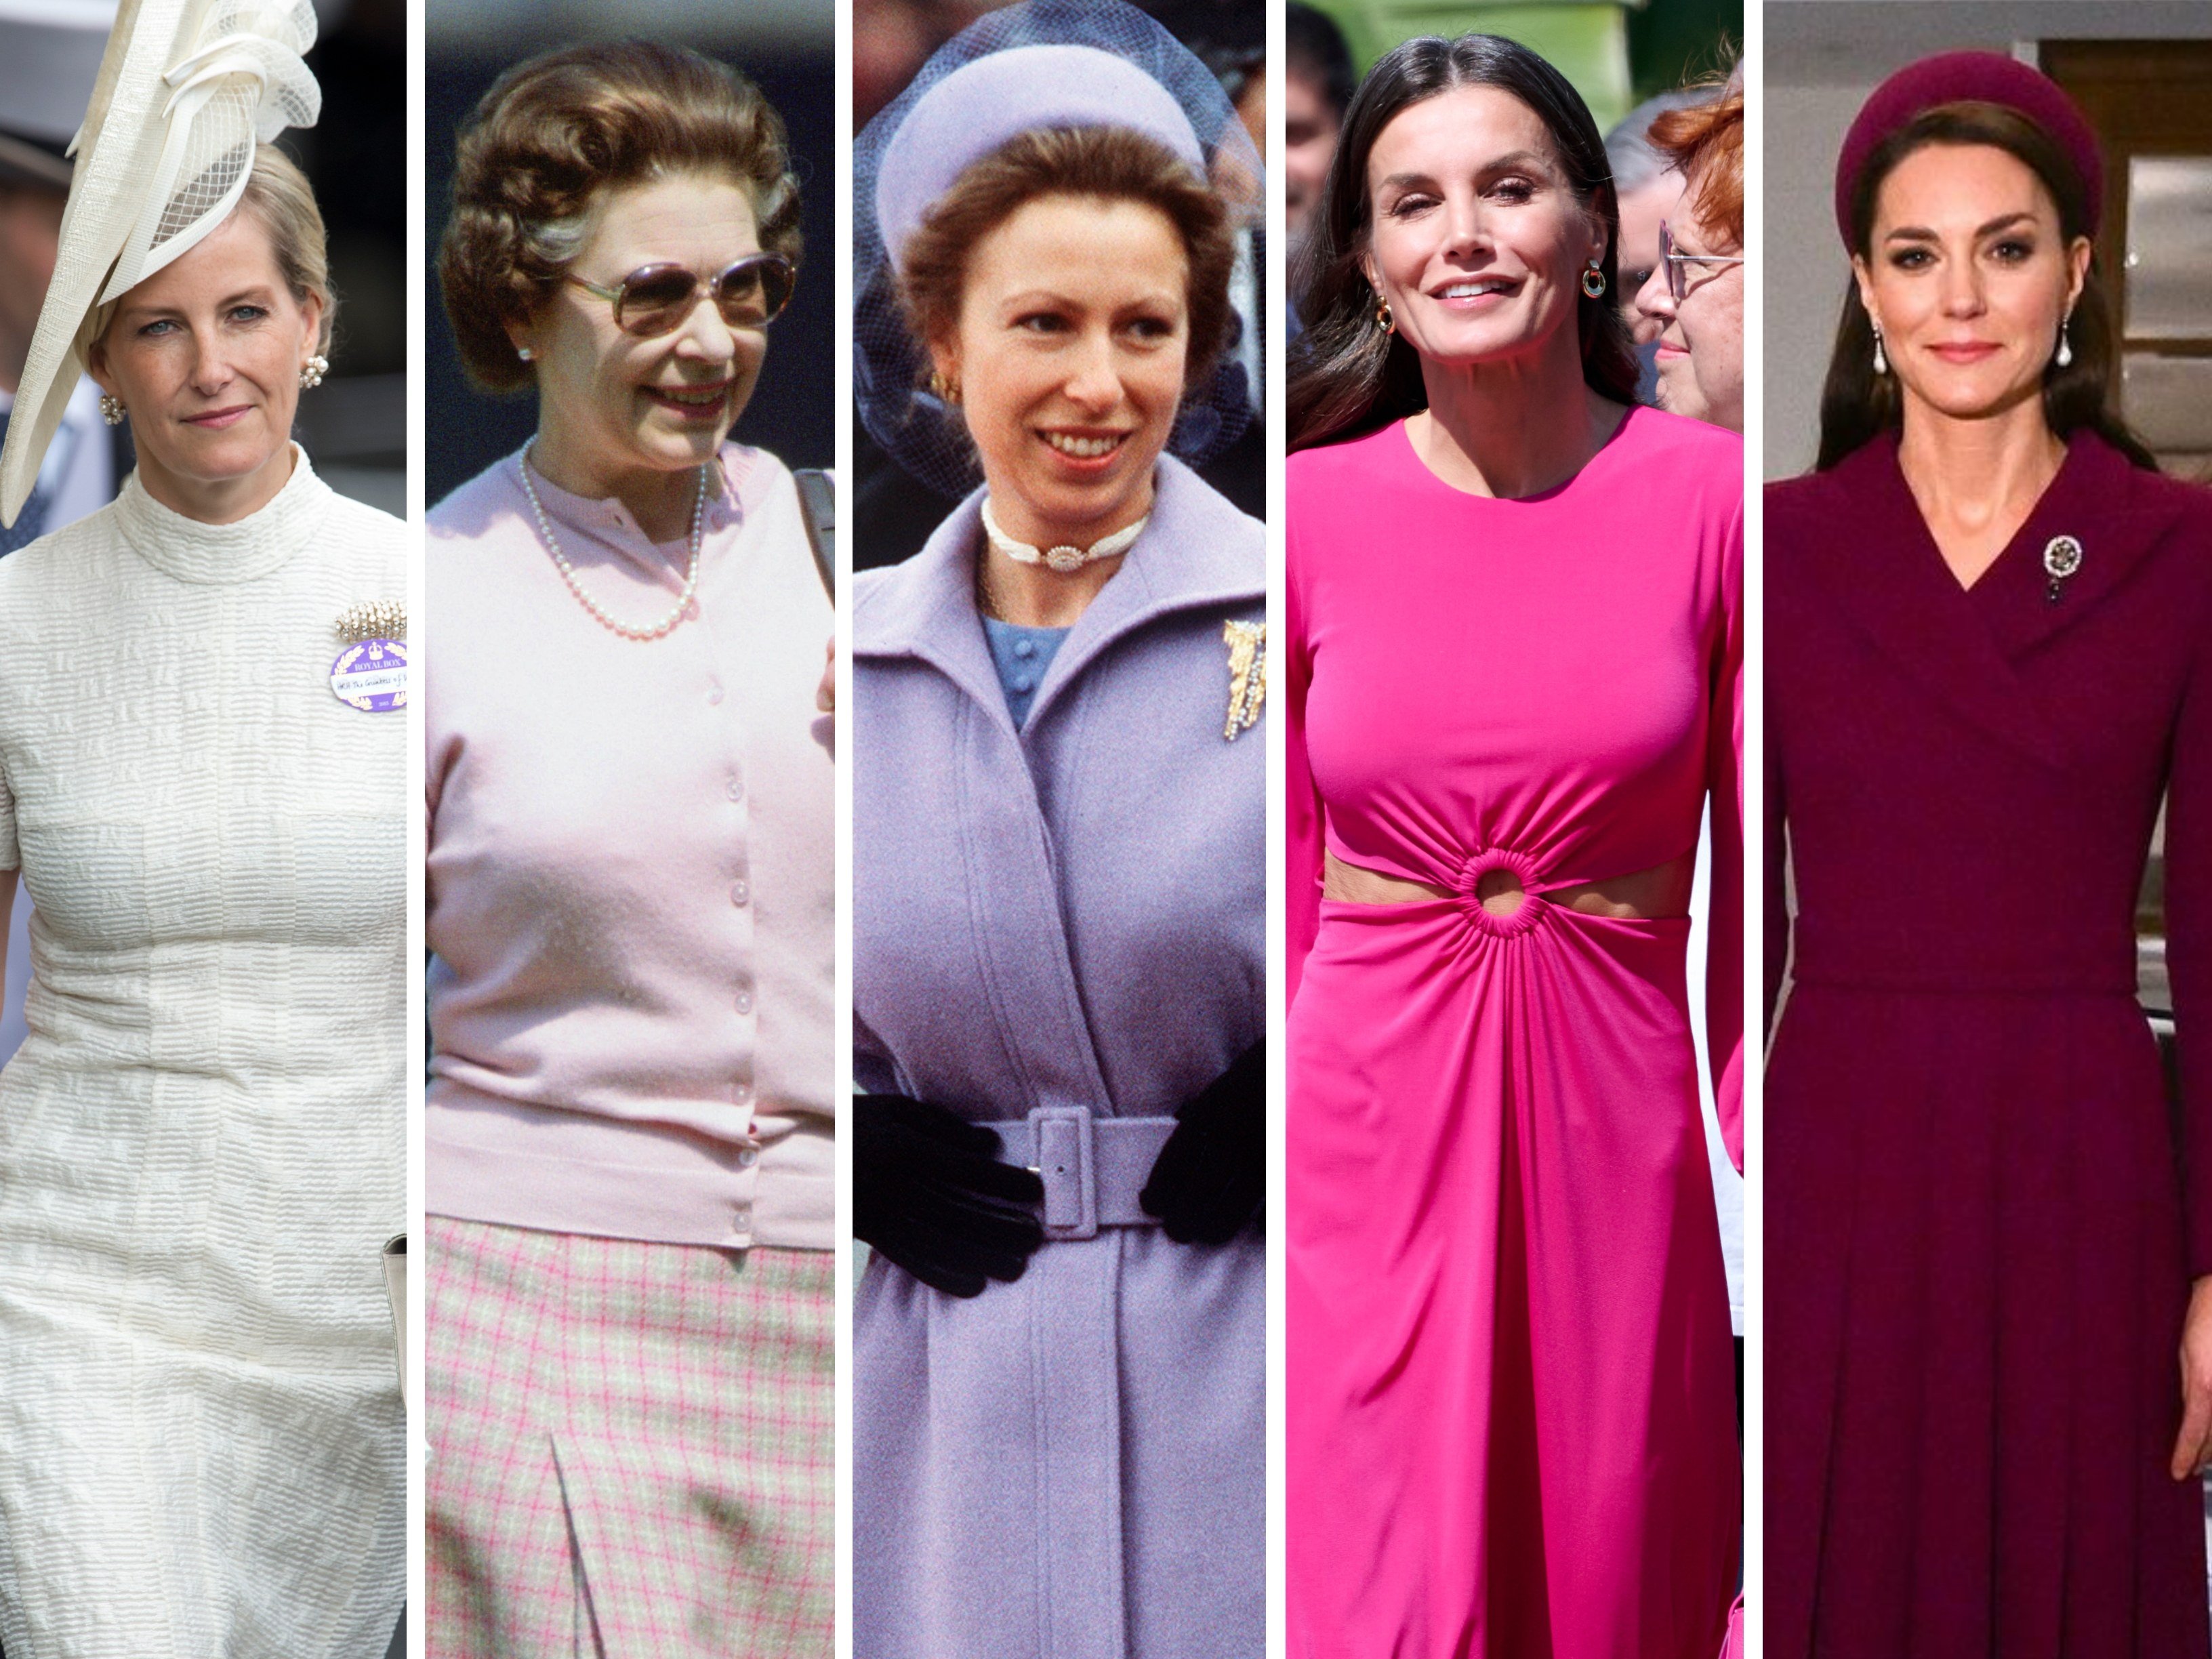 Sophie, Countess of Wessex, Queen Elizabeth, Princess Anne, Queen Letizia of Spain and Kate Middleton are considered to be among the most fashionable royals. Photos: Getty Images, @princeandprincessofwales/Instagram